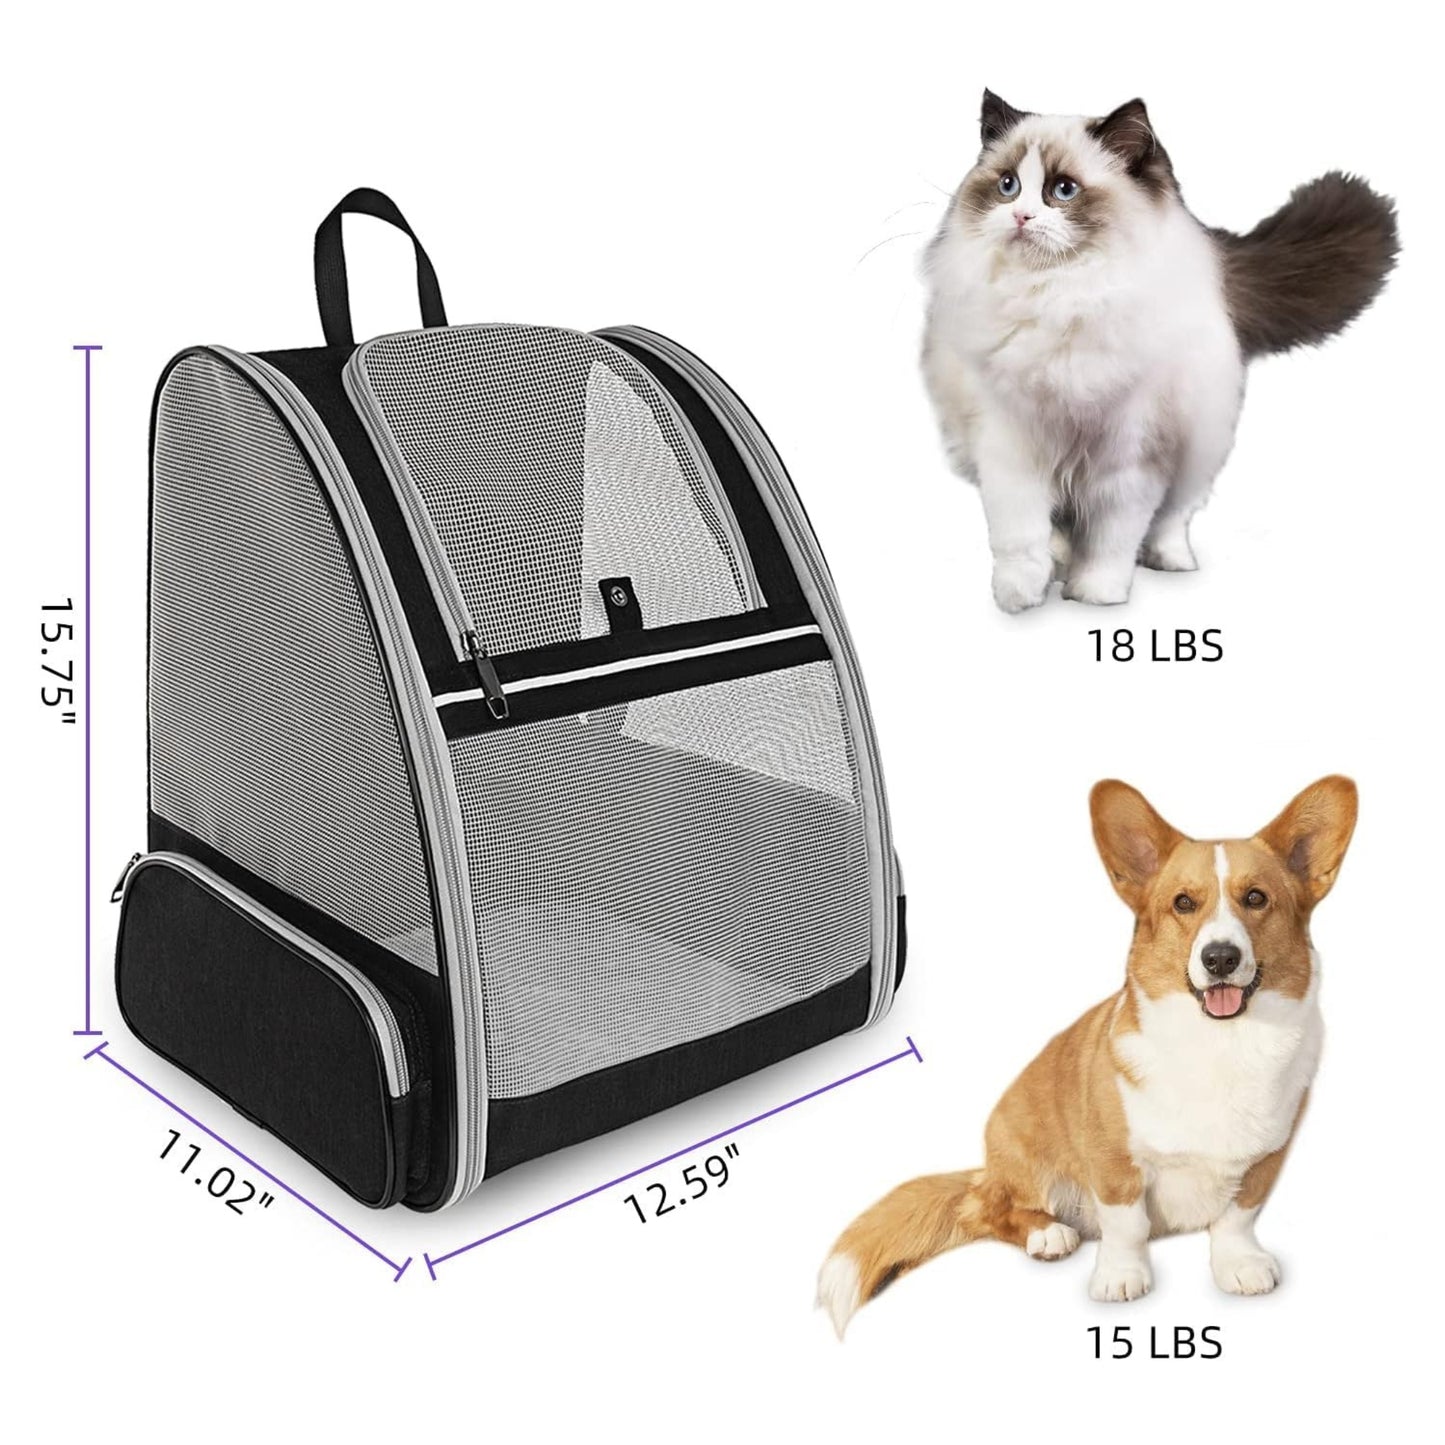 Foodie Puppies Pet Ventura Black Backpack for Small Dogs and Cats